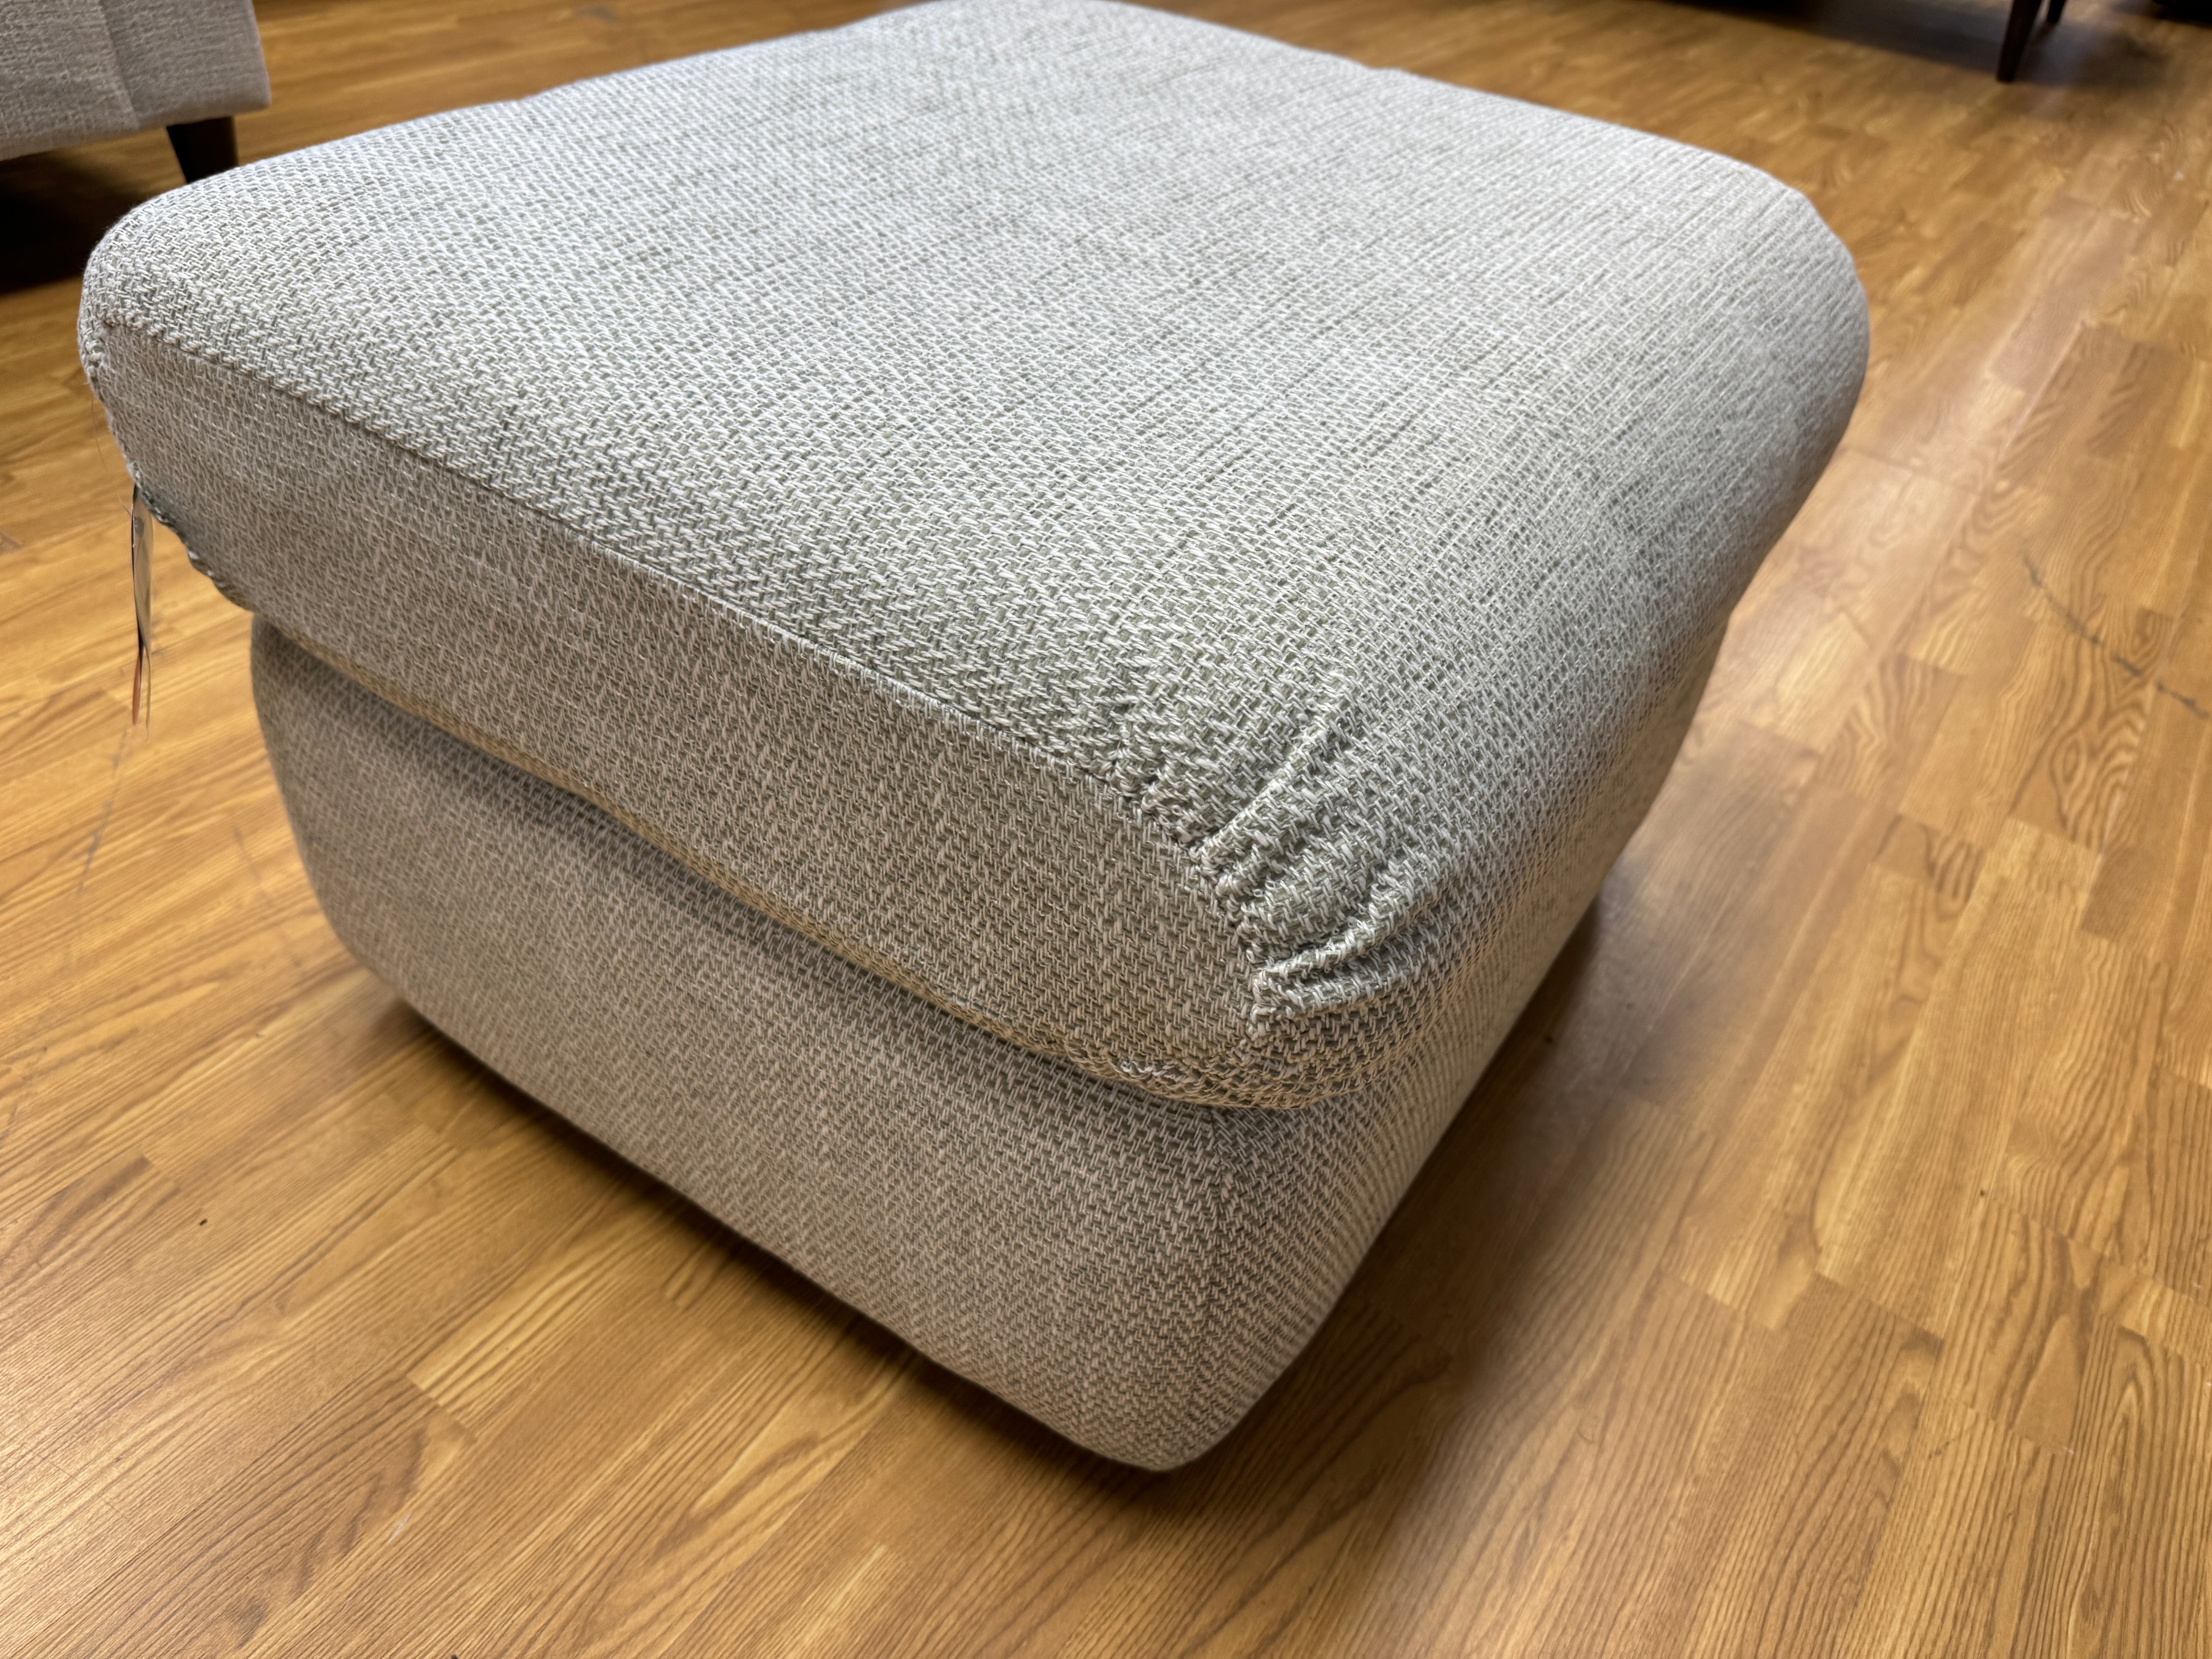 G PLAN NEWMARKET padded top footstool in light grey weave fabric